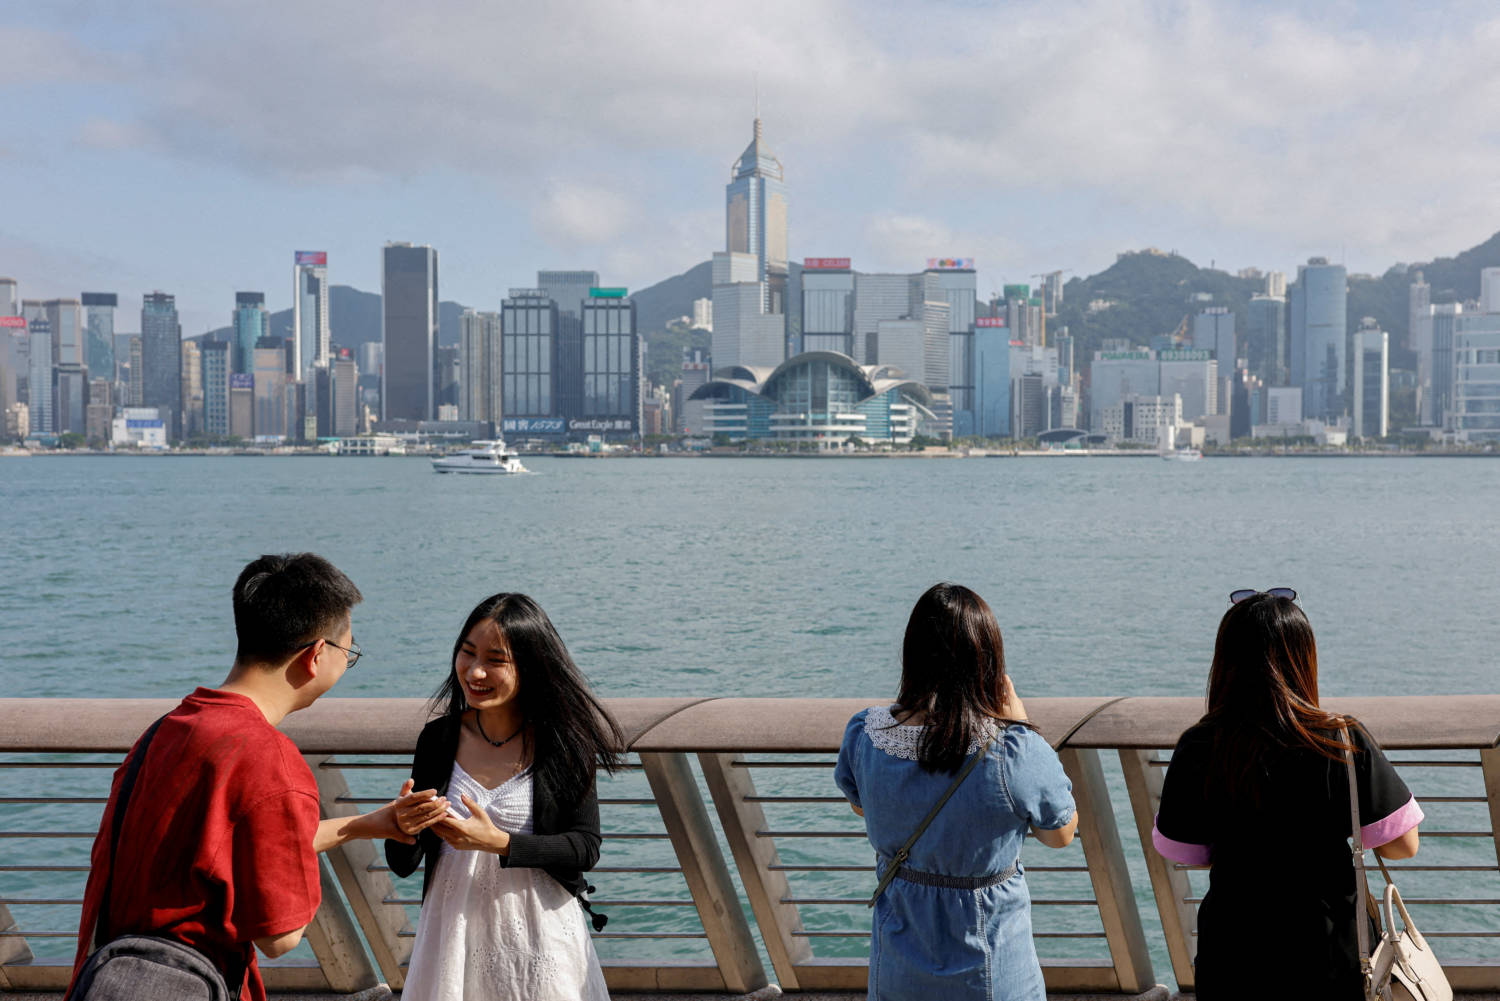 File Photo: Mainland Chinese Tourists Take Photo Of The Skyline Of Buildings At Tsim Sha Tsui, In Hong Kong